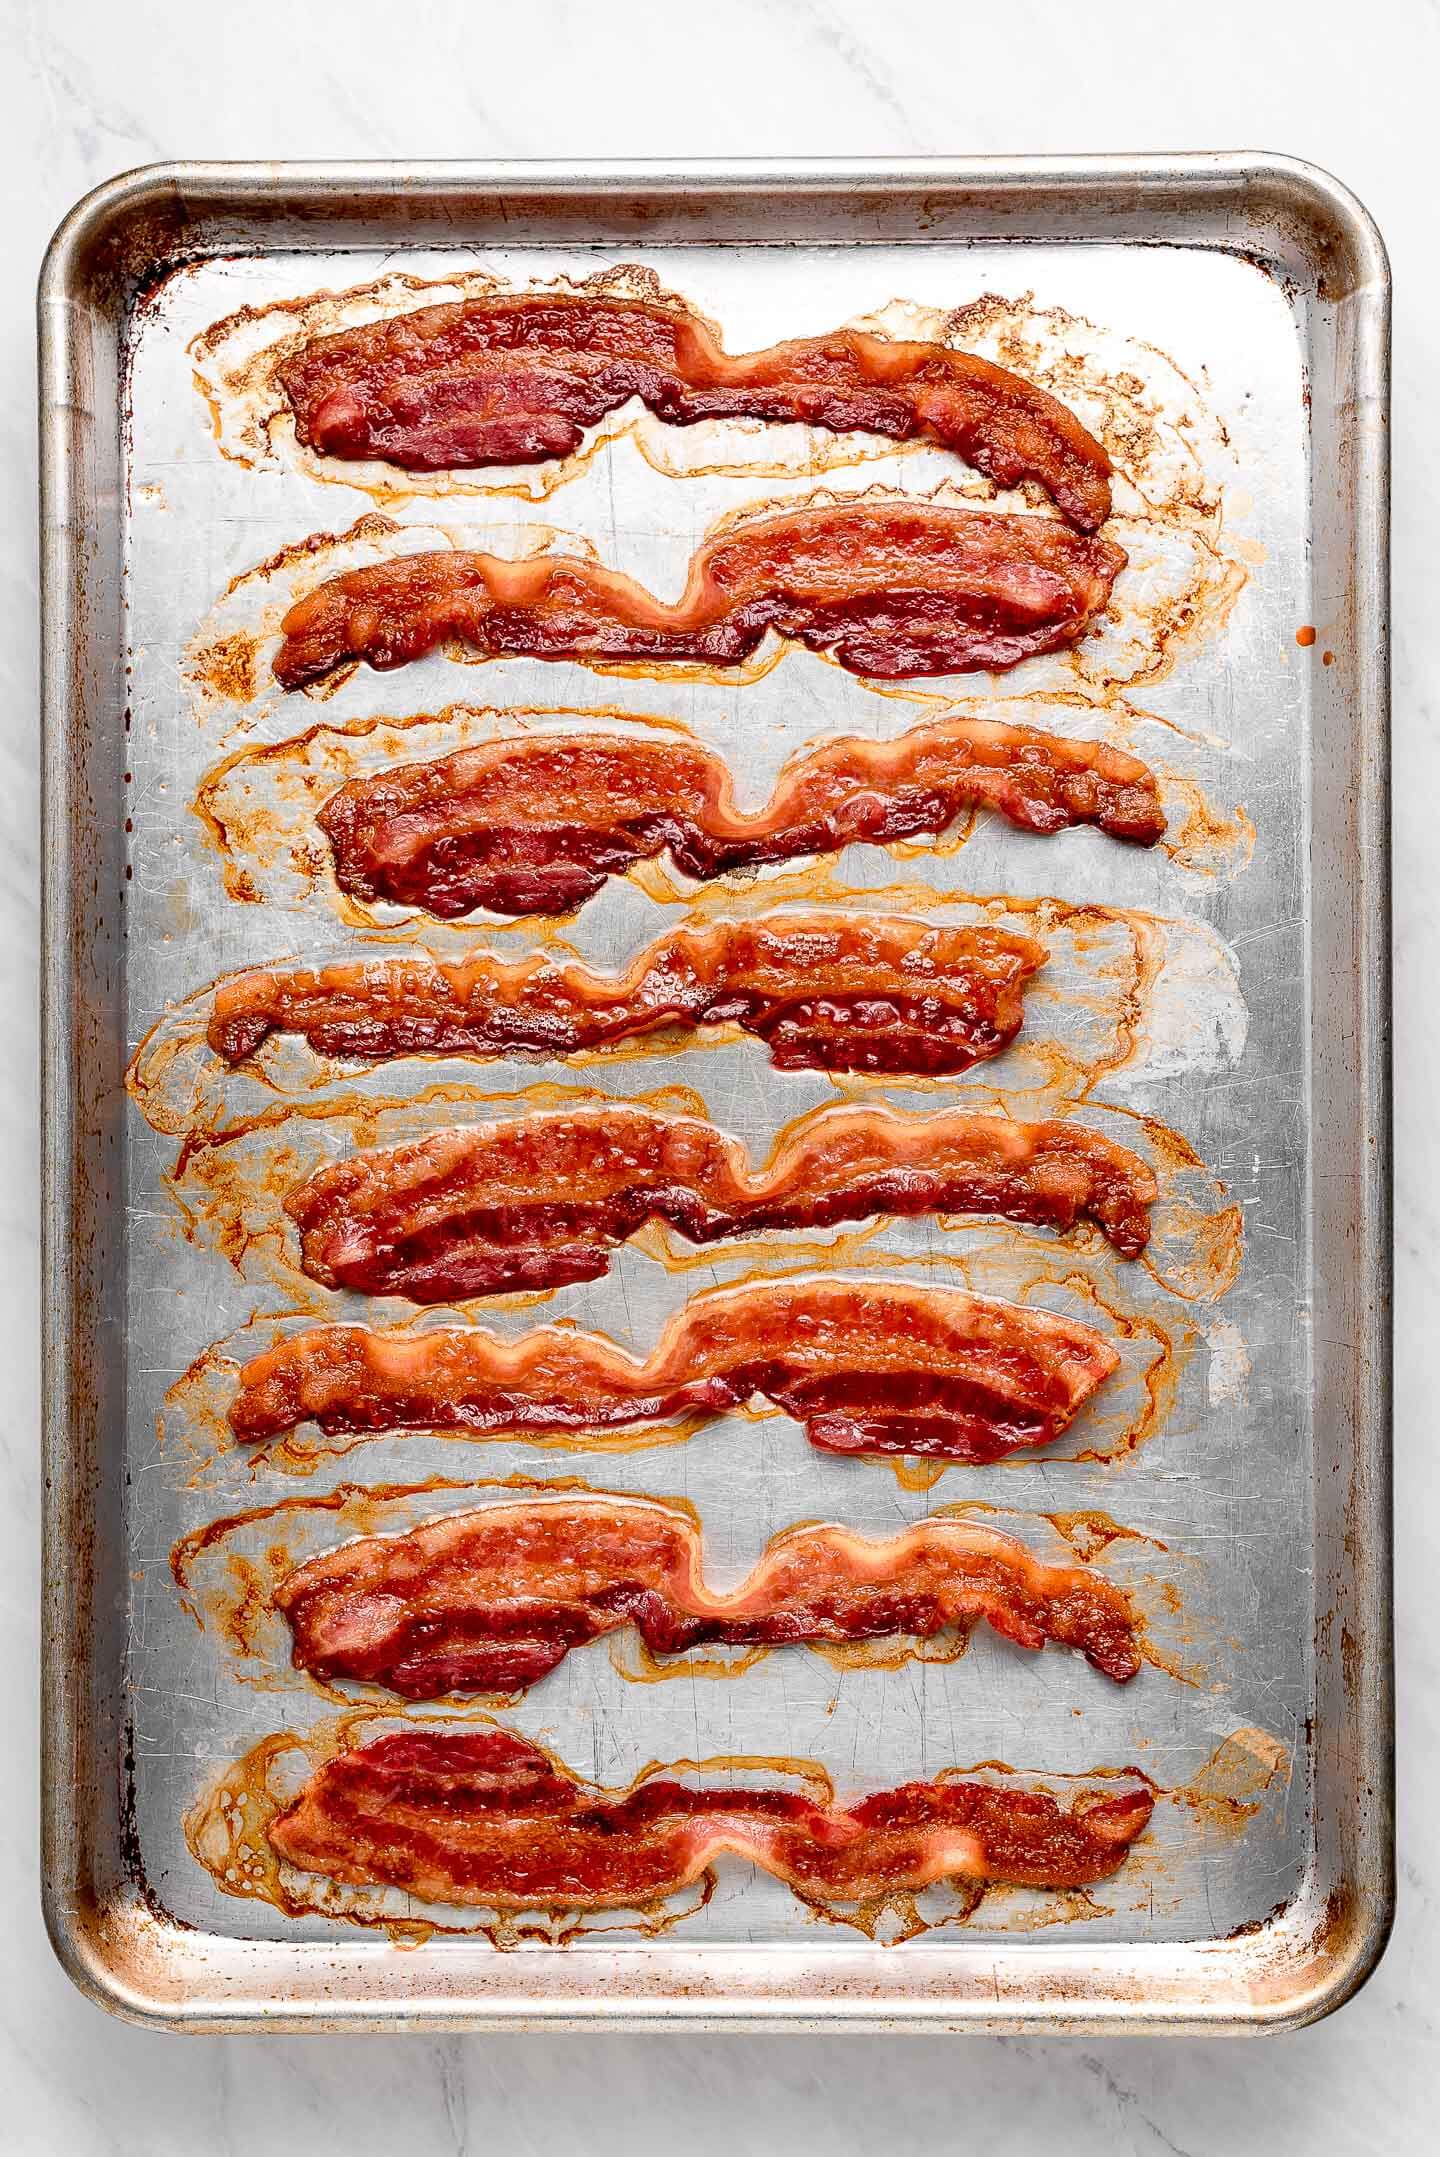 How to Bake Bacon in the Oven - Garnish & Glaze